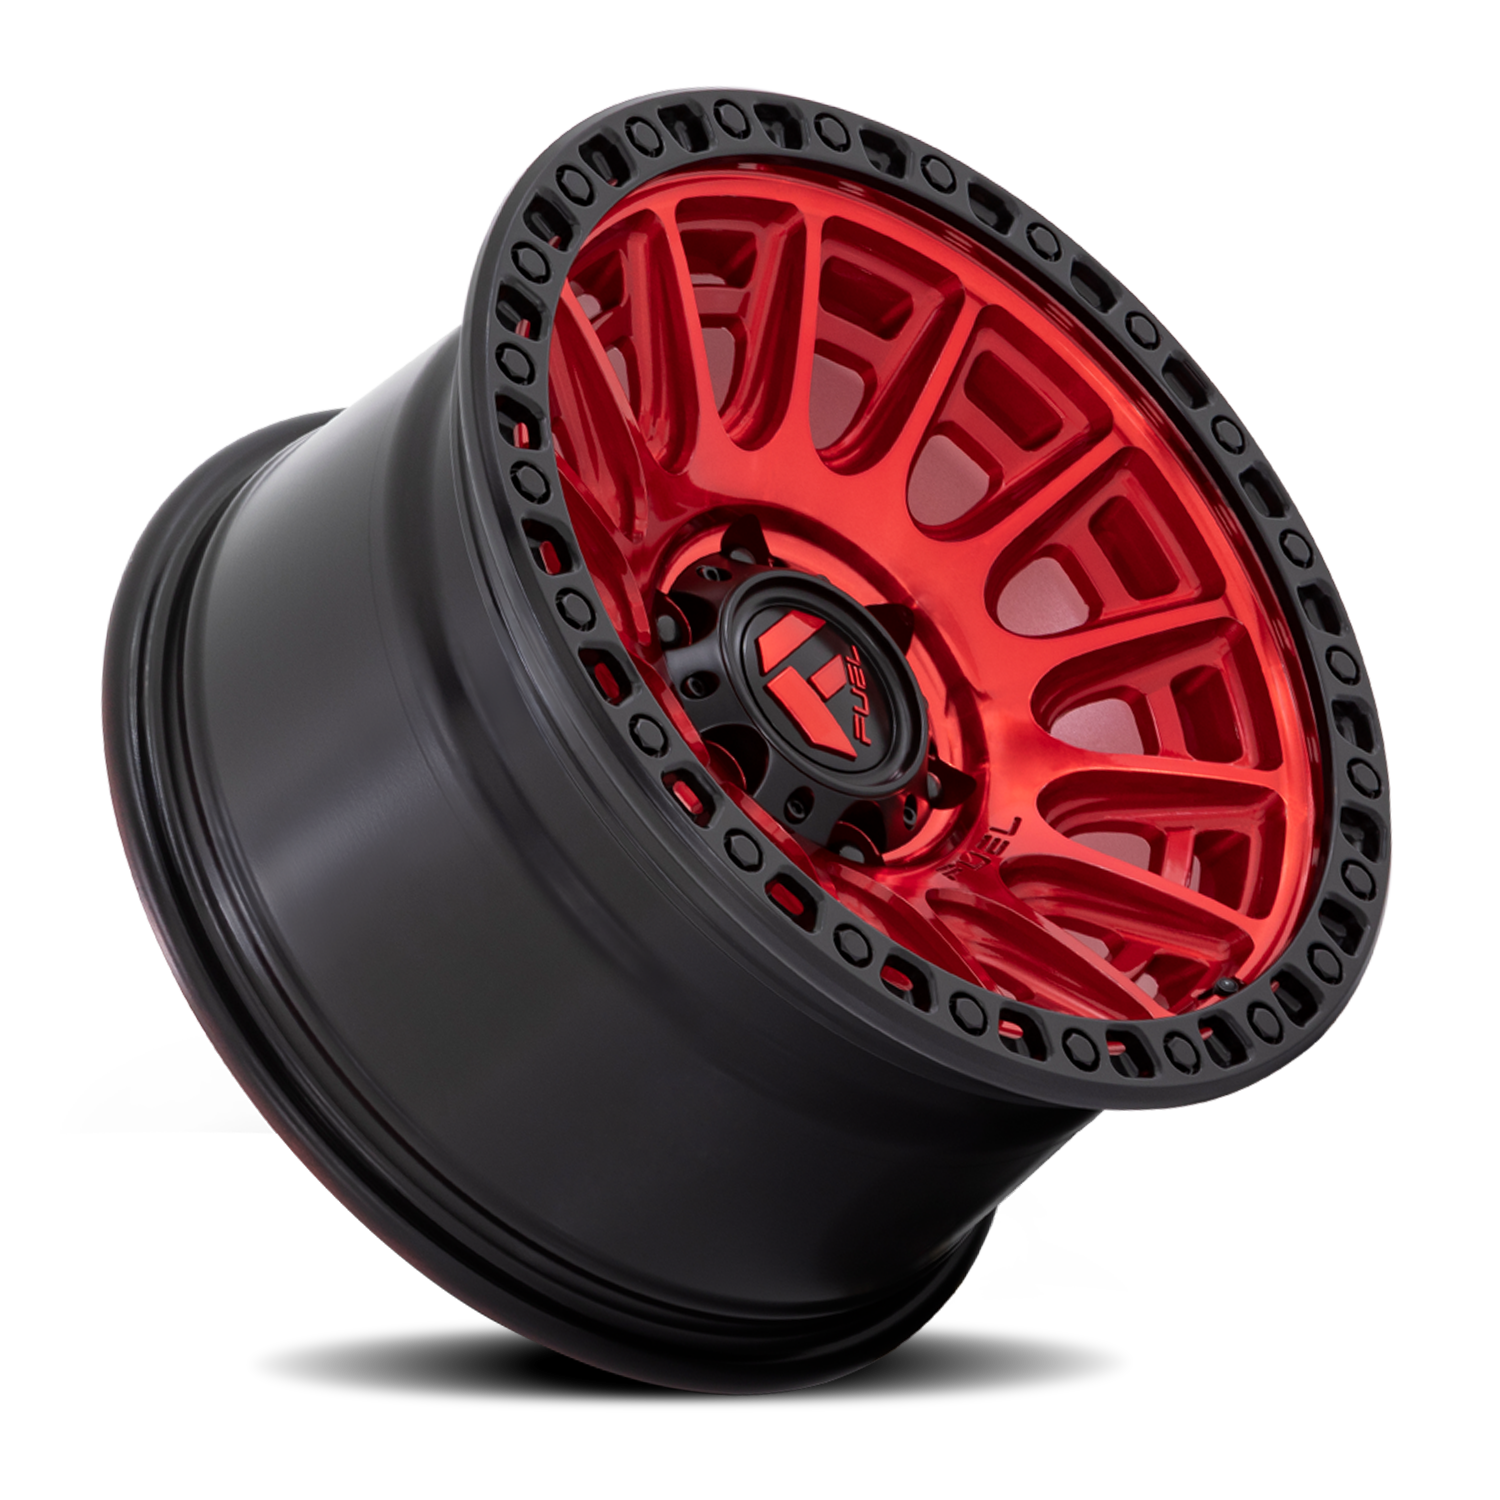 https://storage.googleapis.com/autosync-wheels/Fuel/Cycle_D834_Candy-Red_Black-Ring_5-lug_0002.png